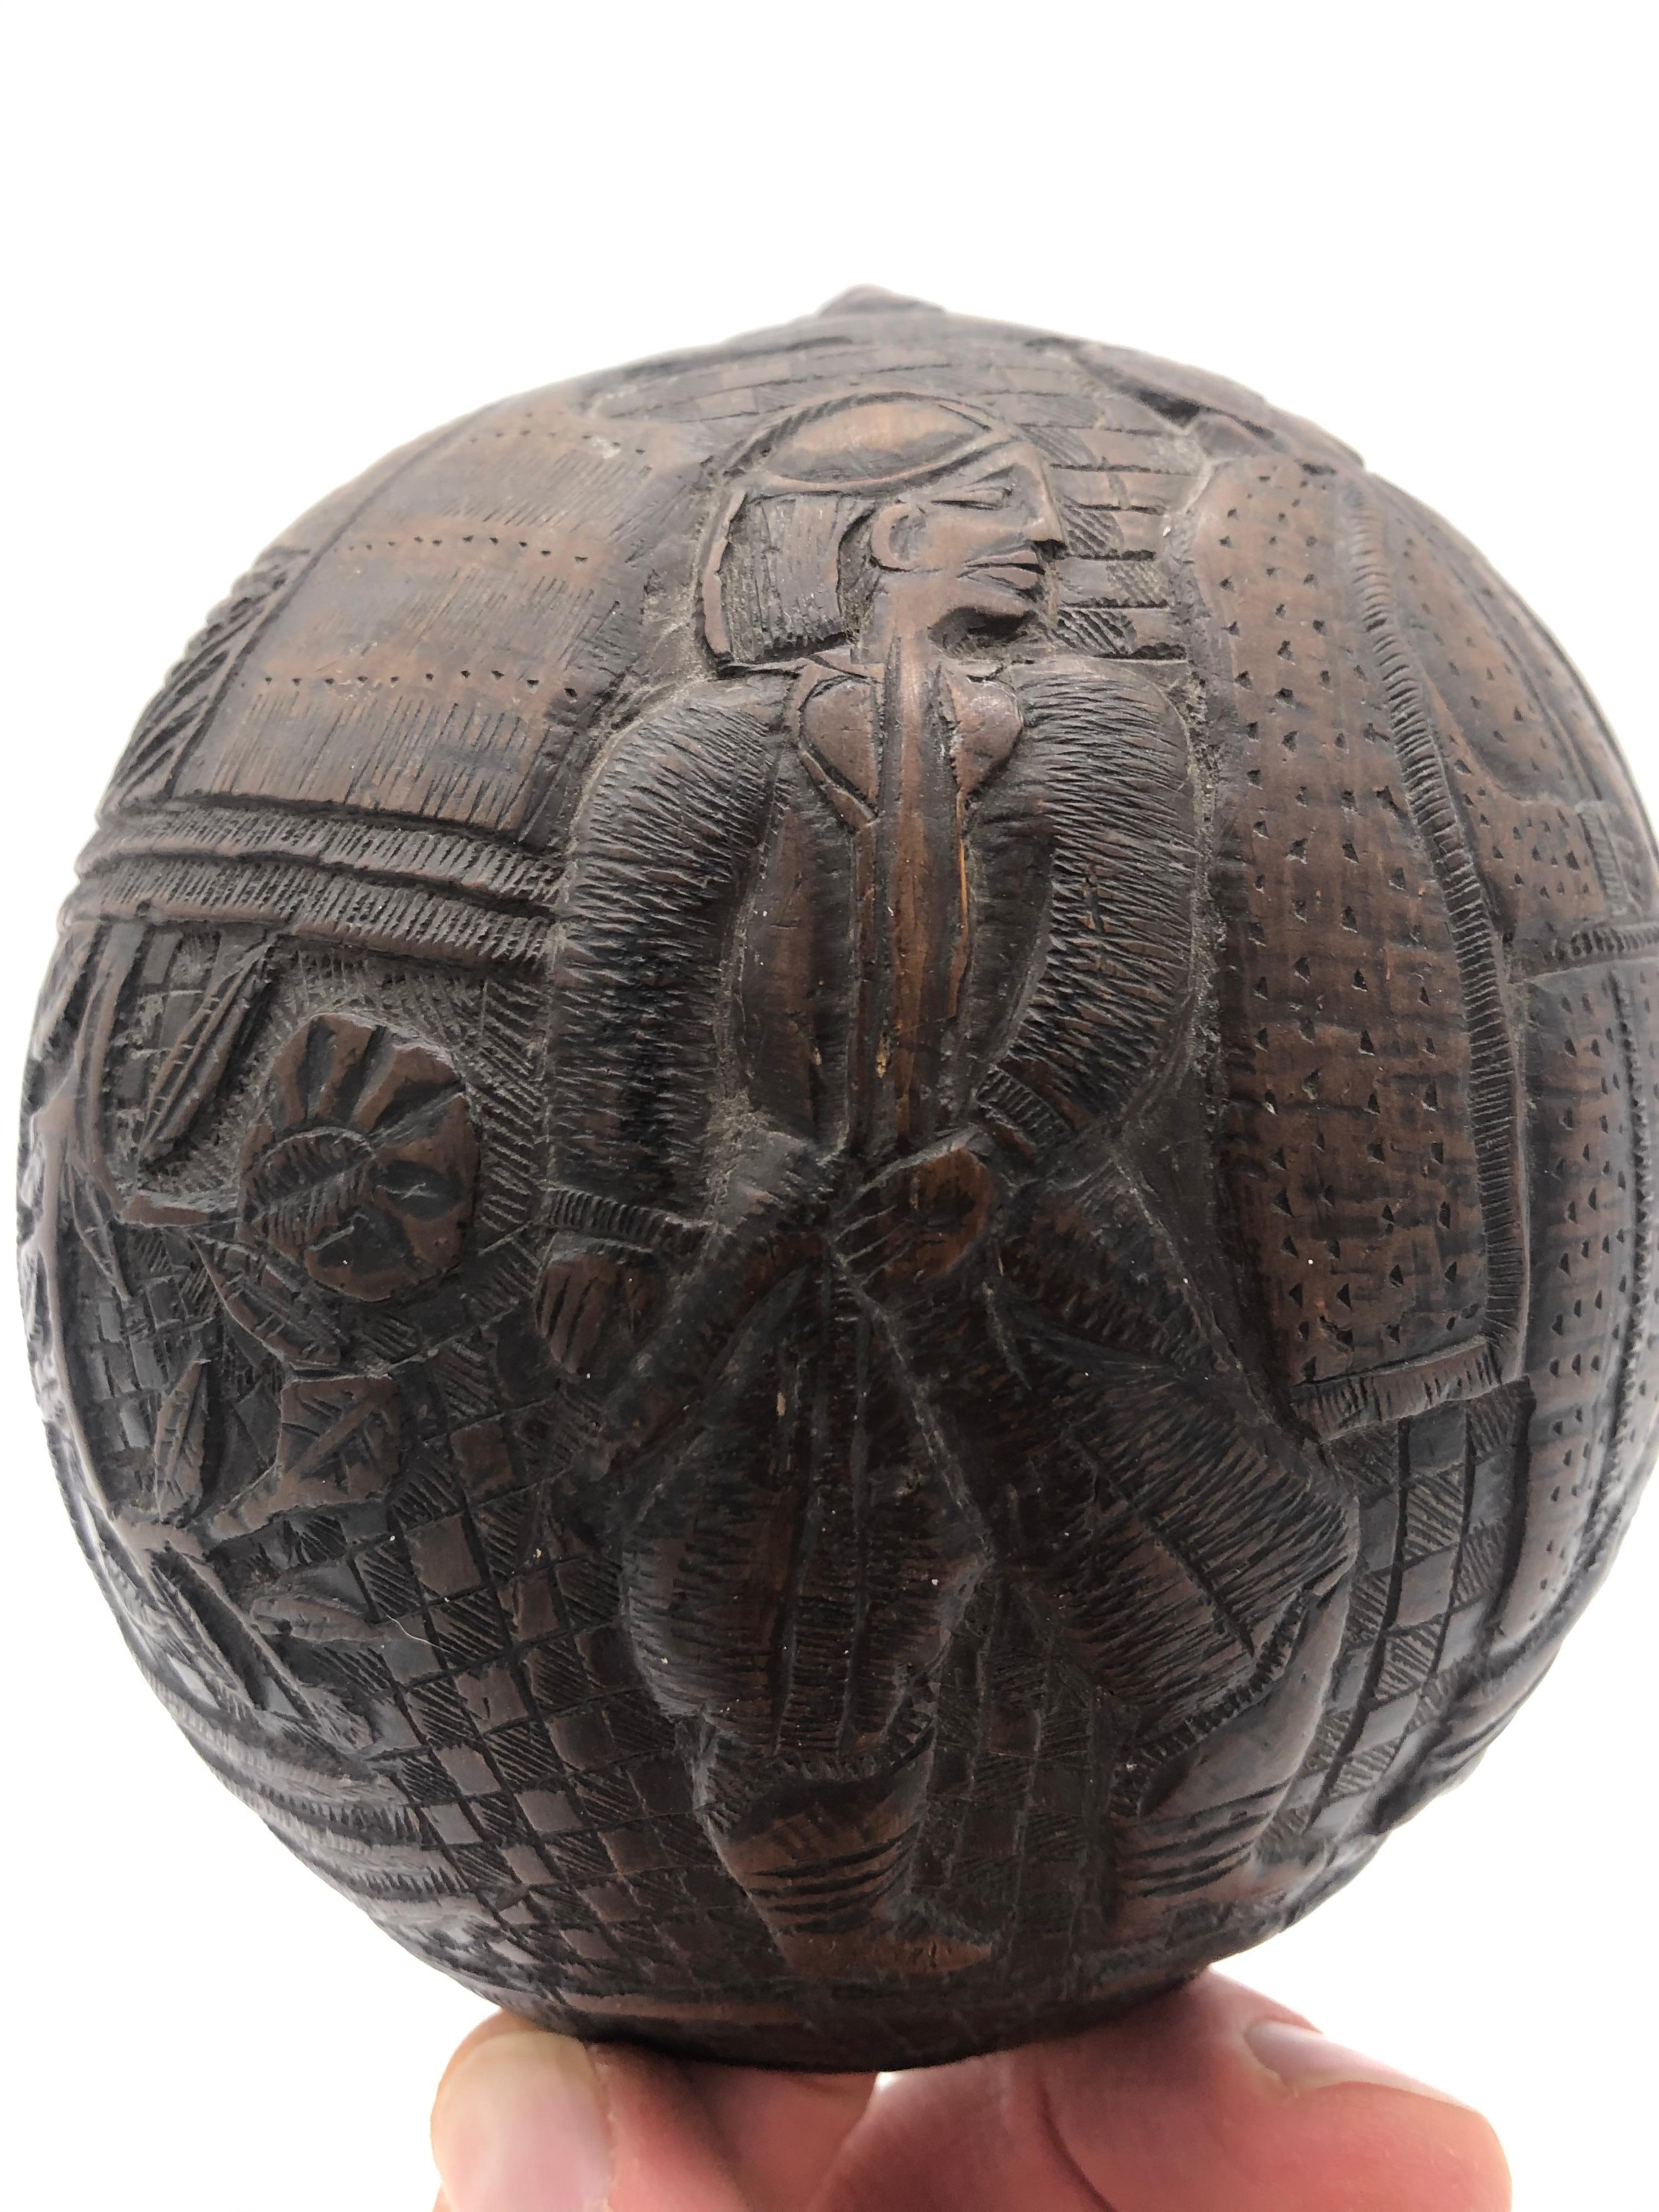 Sailors from various countries would carve green coconuts to help pass the time. This particular example is early and dates to circa 1800. It has some of the most interesting and folky figures, when compared with other examples. There are 3 full